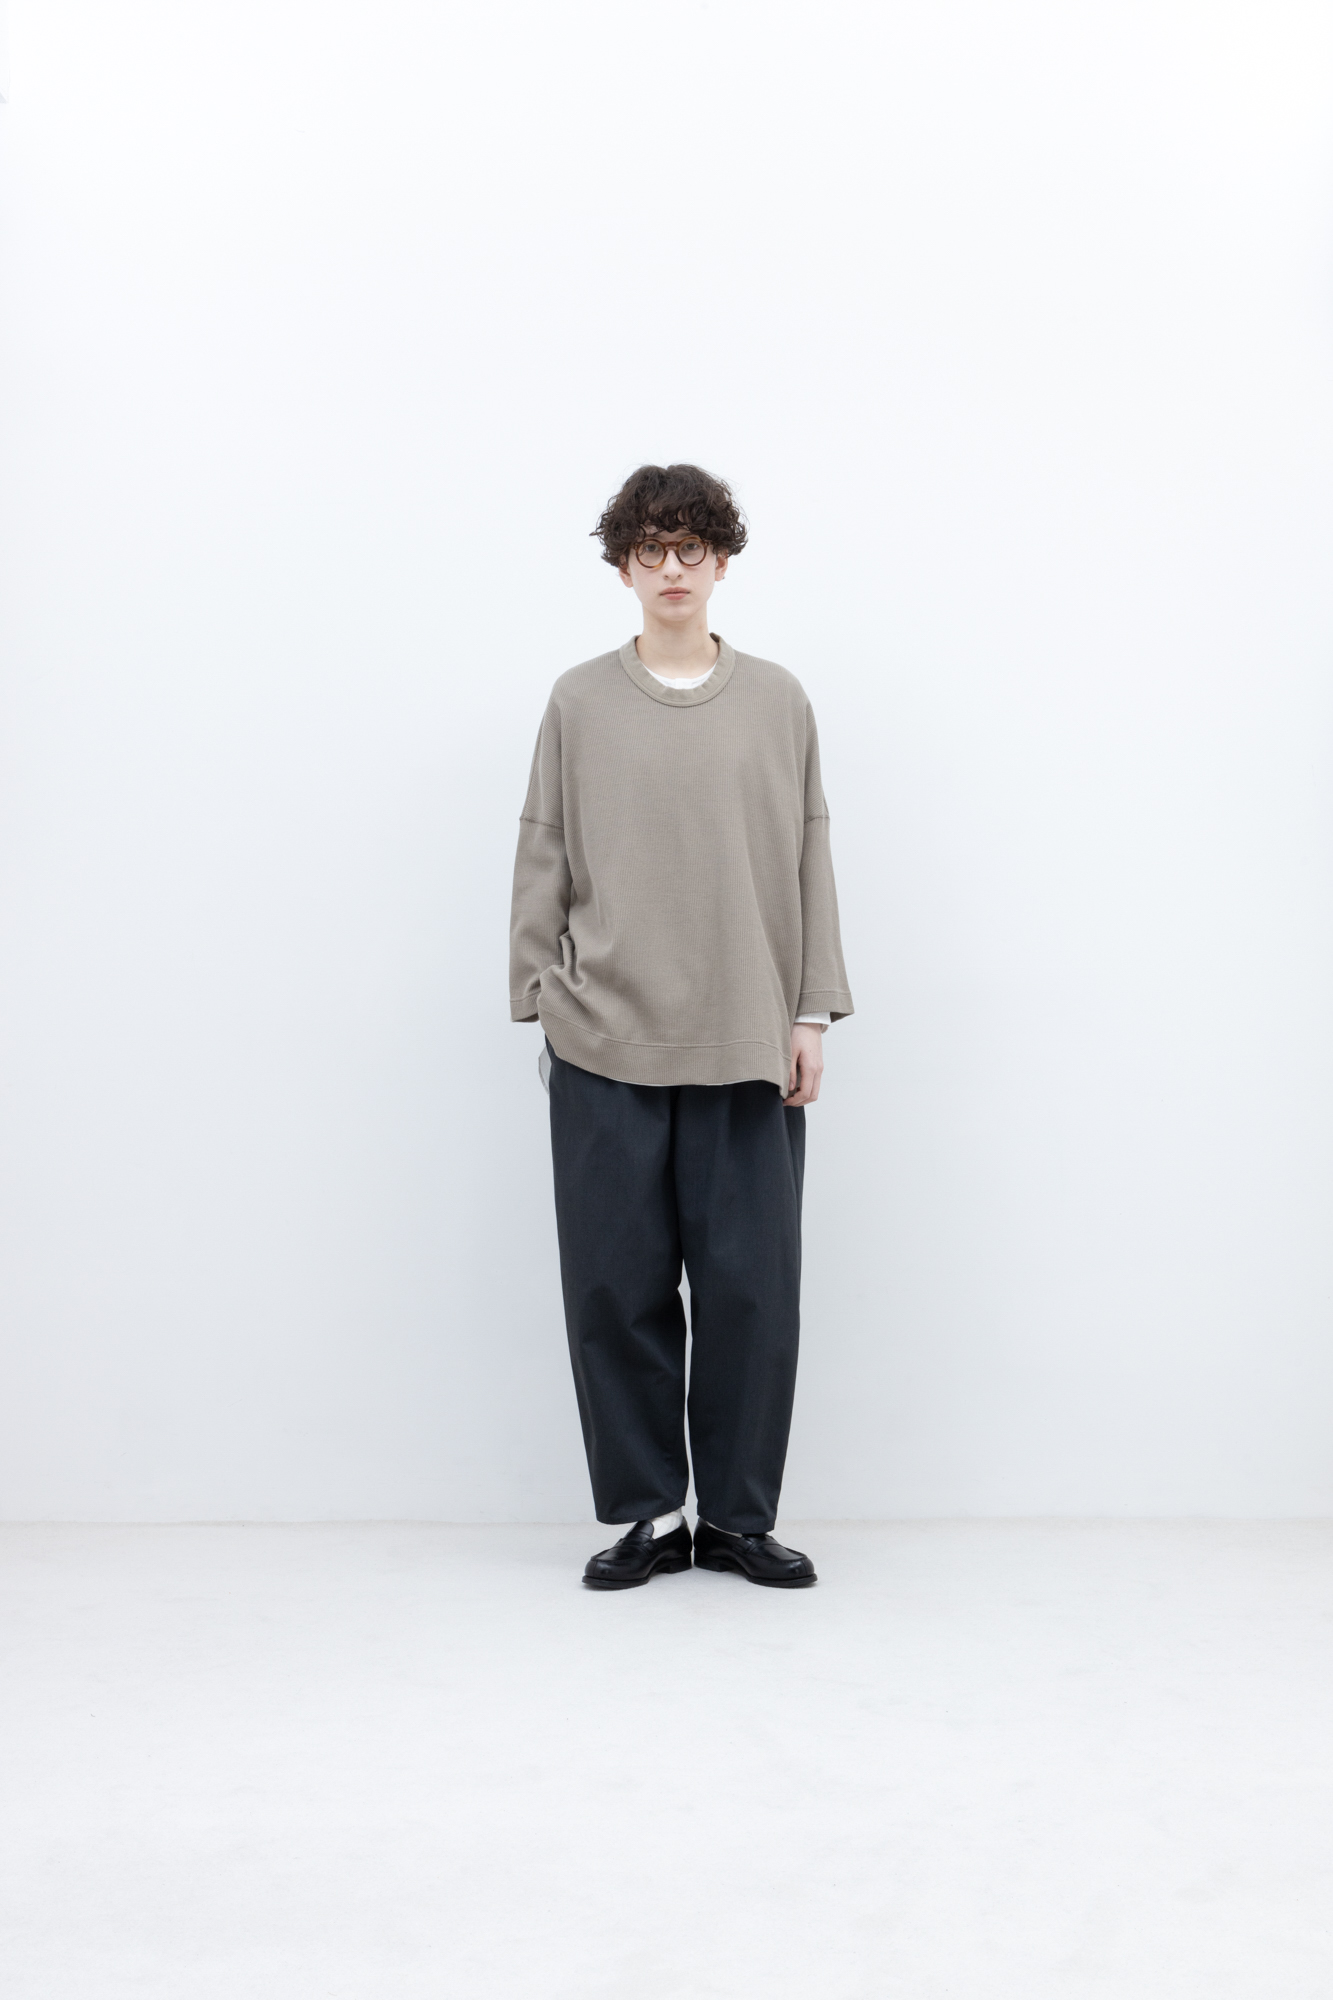 No. 072 | 2022 AW WOMENS / Model H=169cm | LOOK | FIRMUM